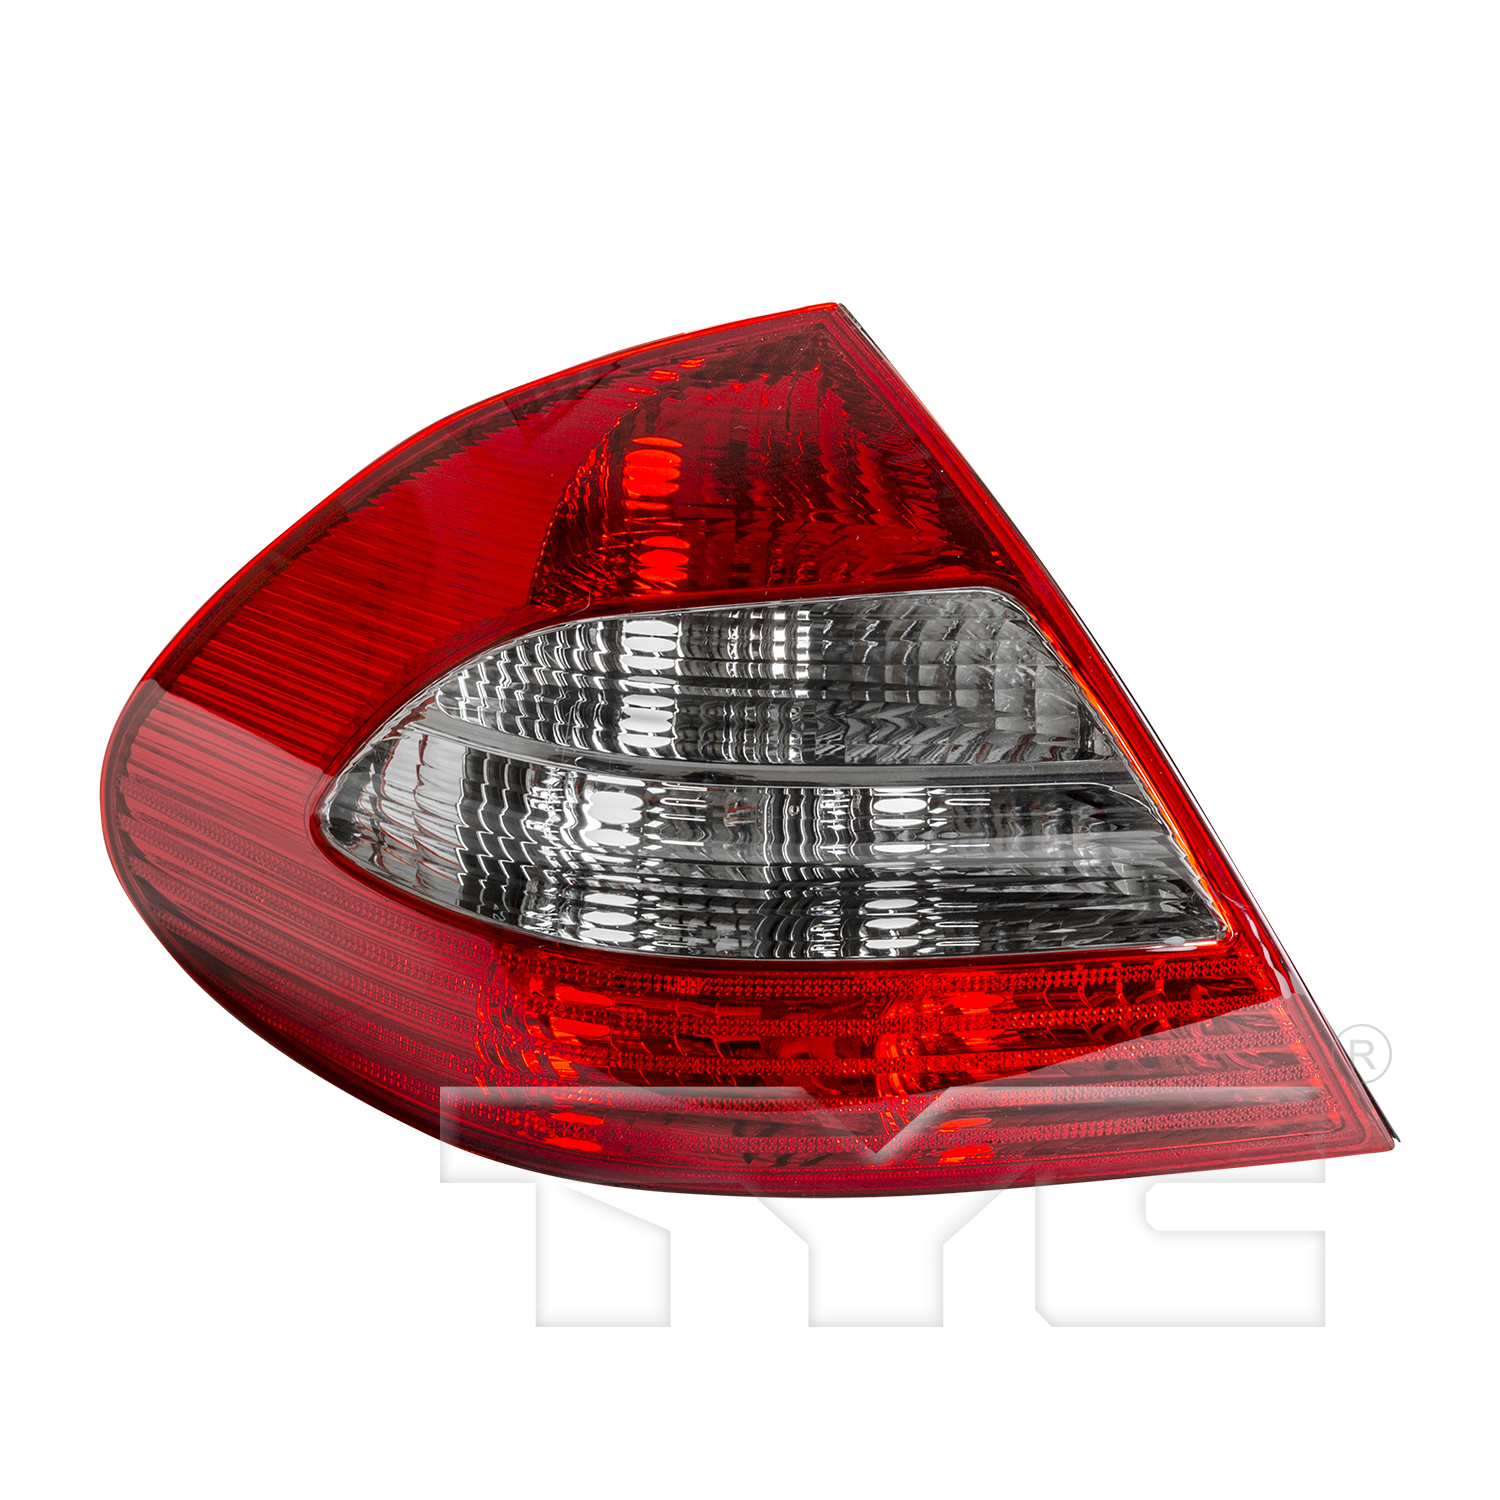 Aftermarket TAILLIGHTS for MERCEDES-BENZ - E350, E350,07-09,LT Taillamp assy